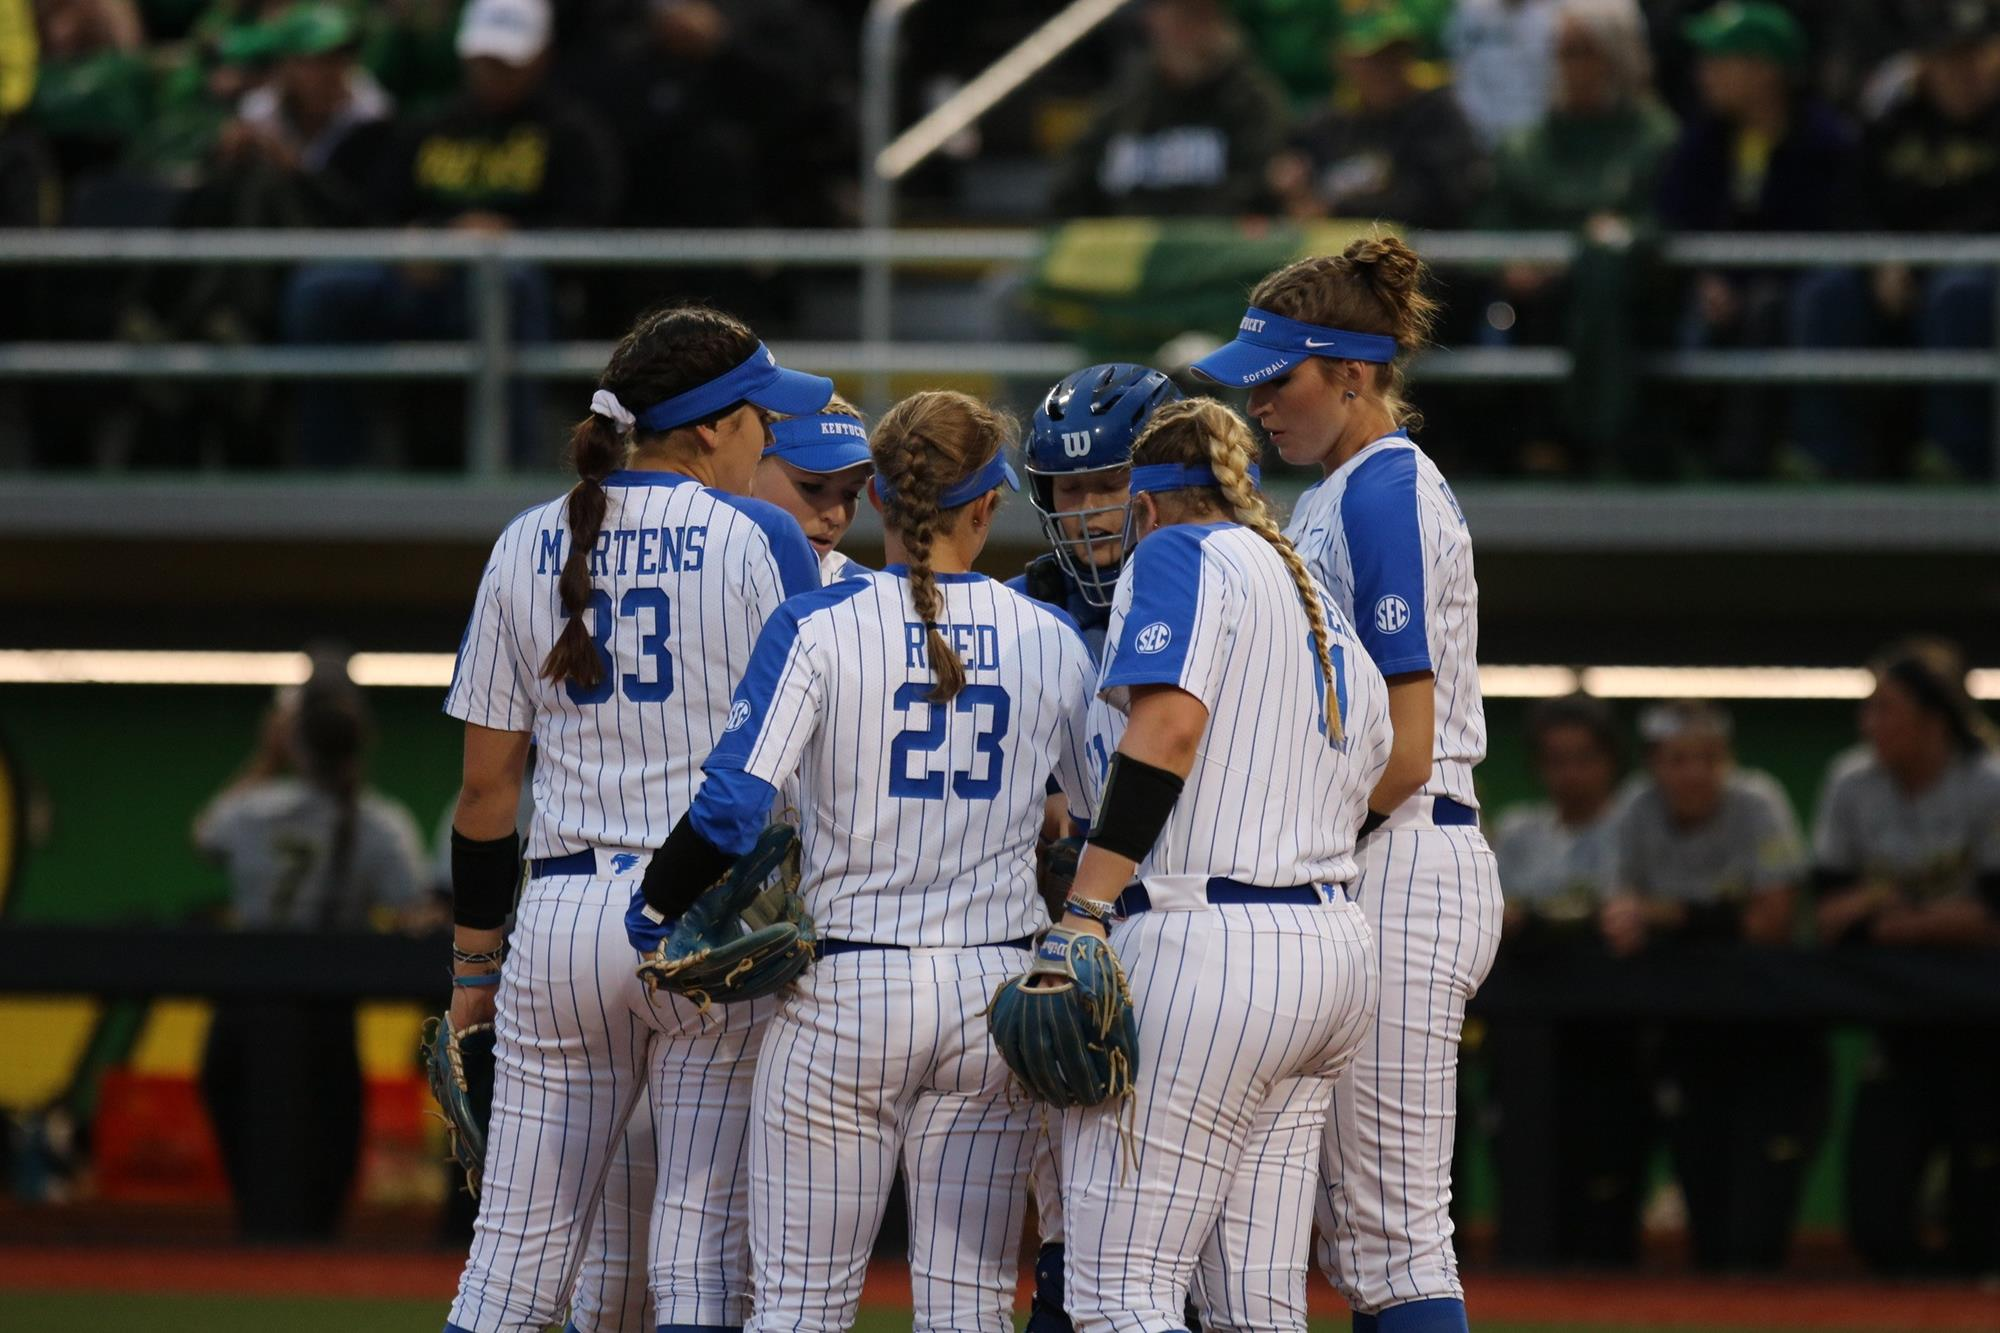 No. 1 Oregon Evens Series, Sets Up Winner-Take-All Game Saturday